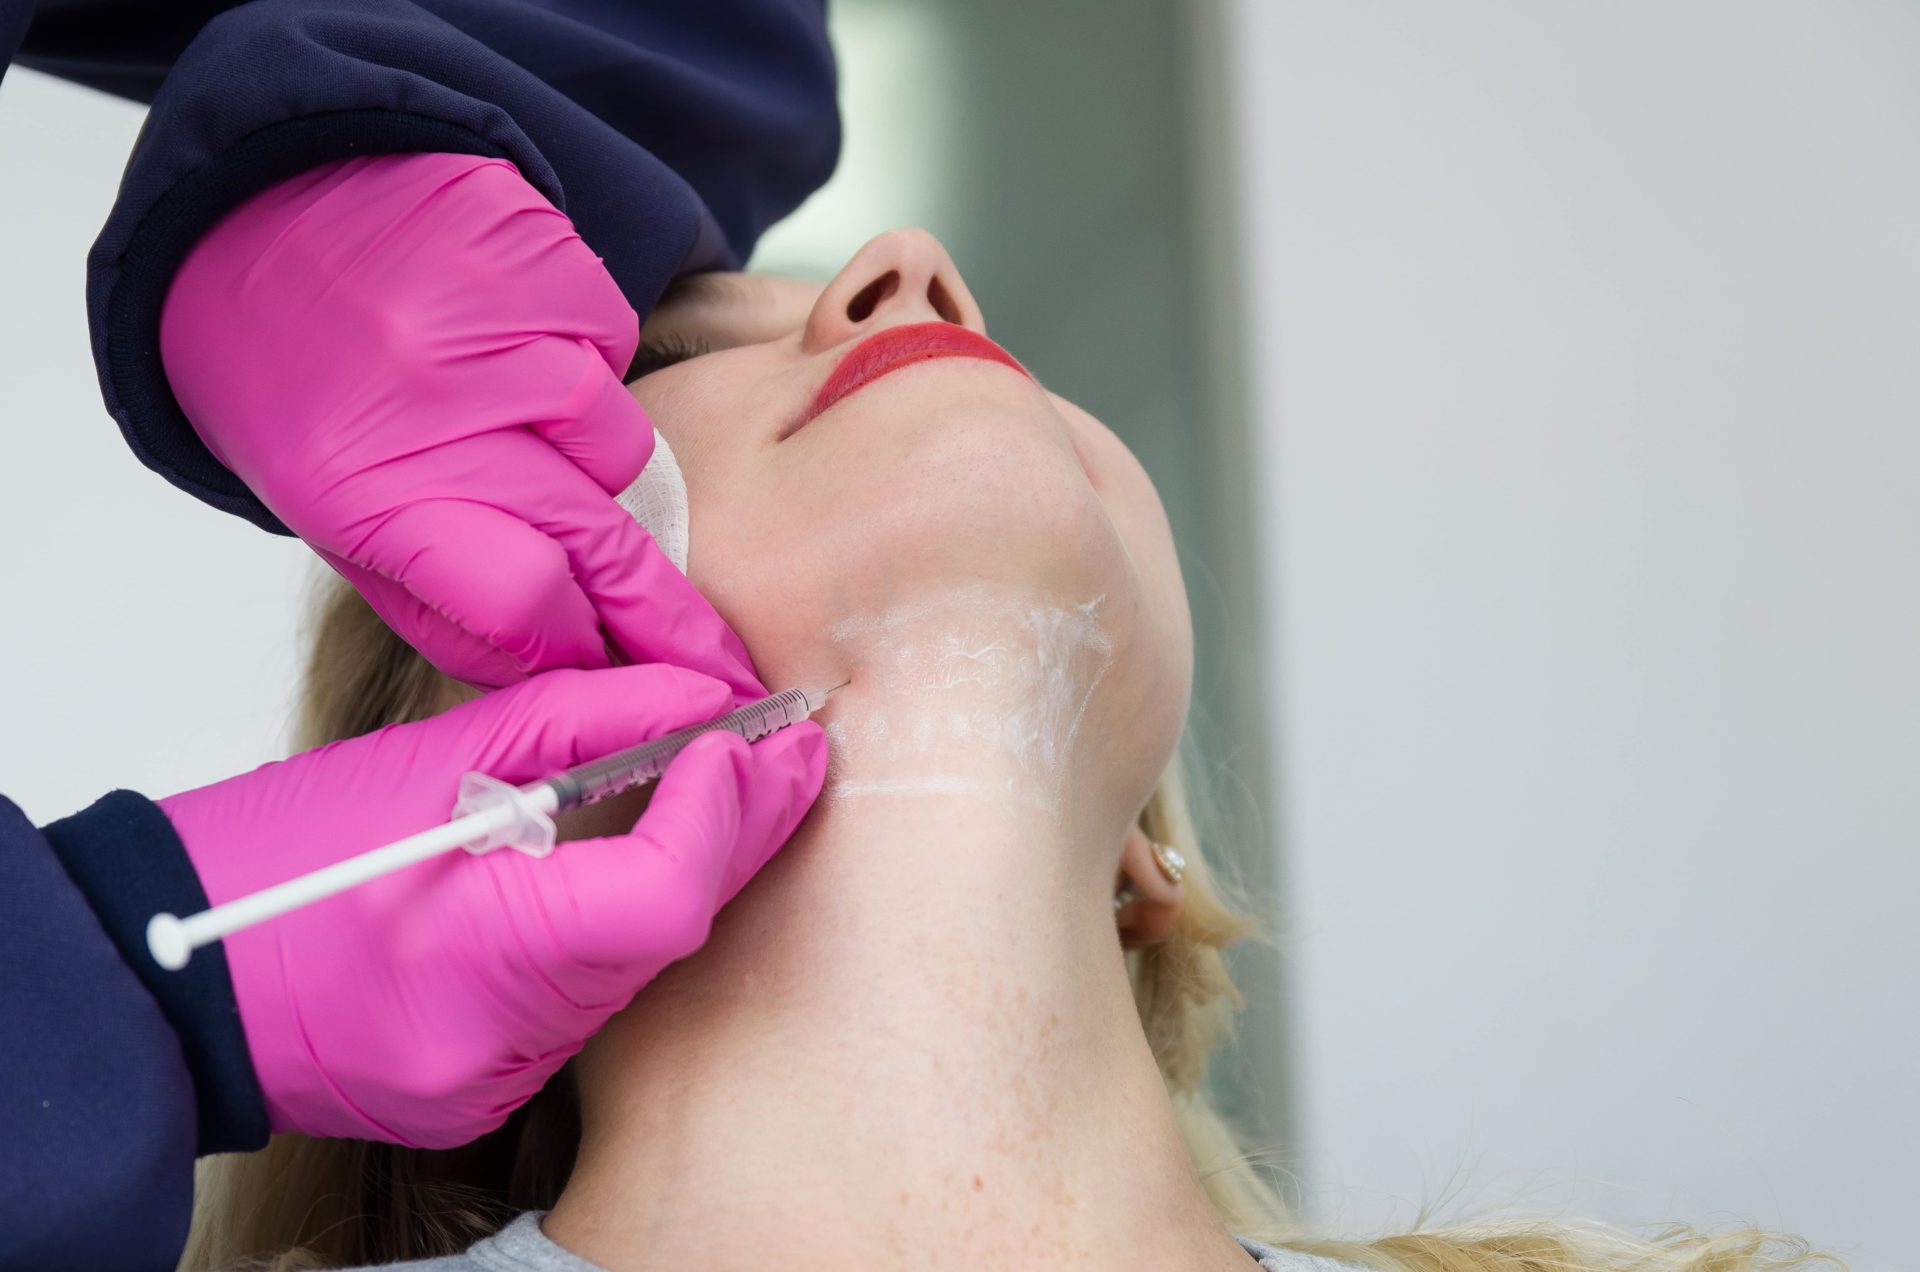 7 Things You Should Know Before A Kybella Treatment